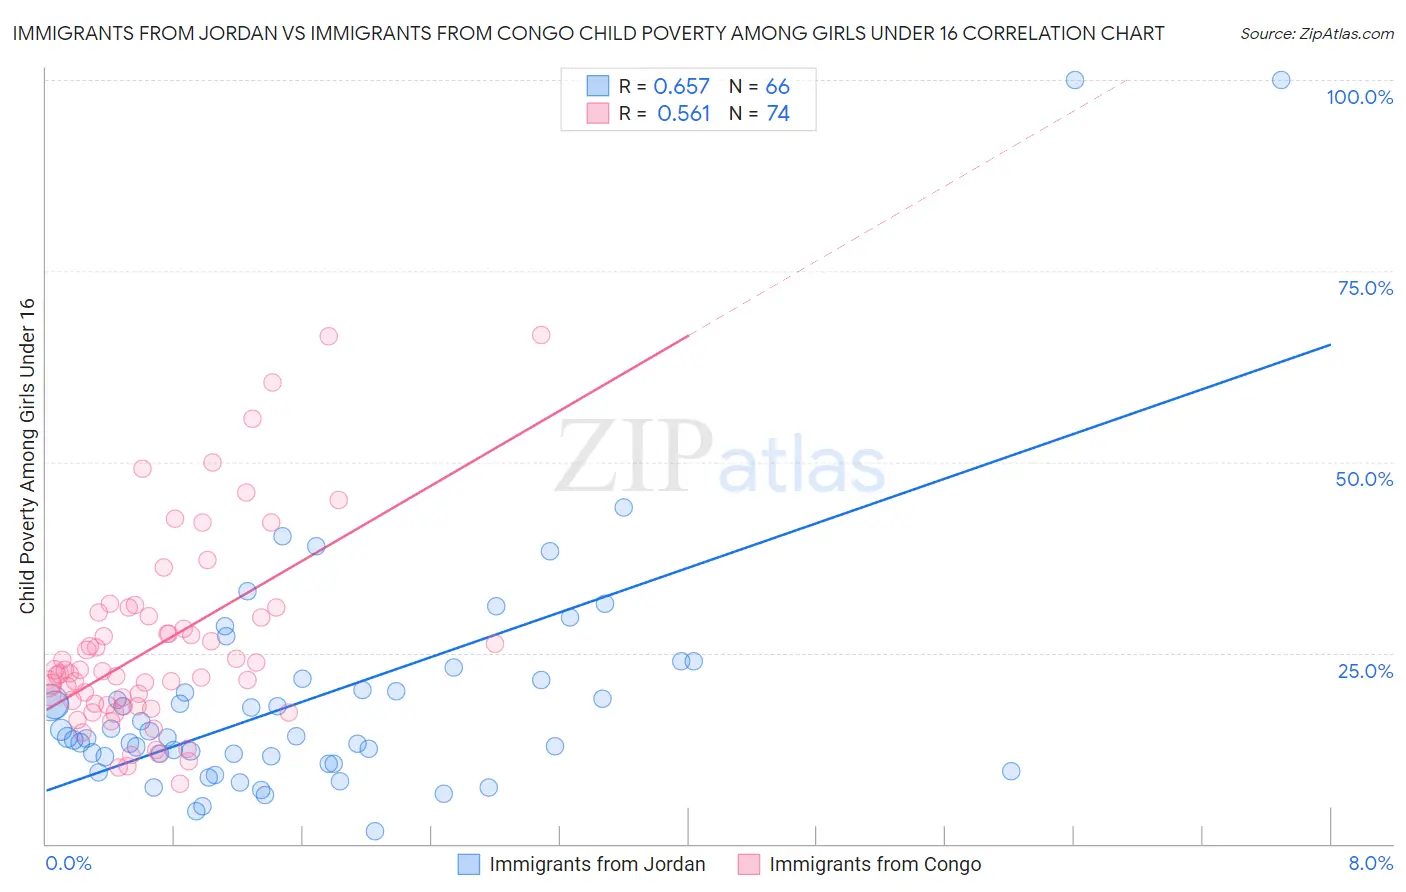 Immigrants from Jordan vs Immigrants from Congo Child Poverty Among Girls Under 16